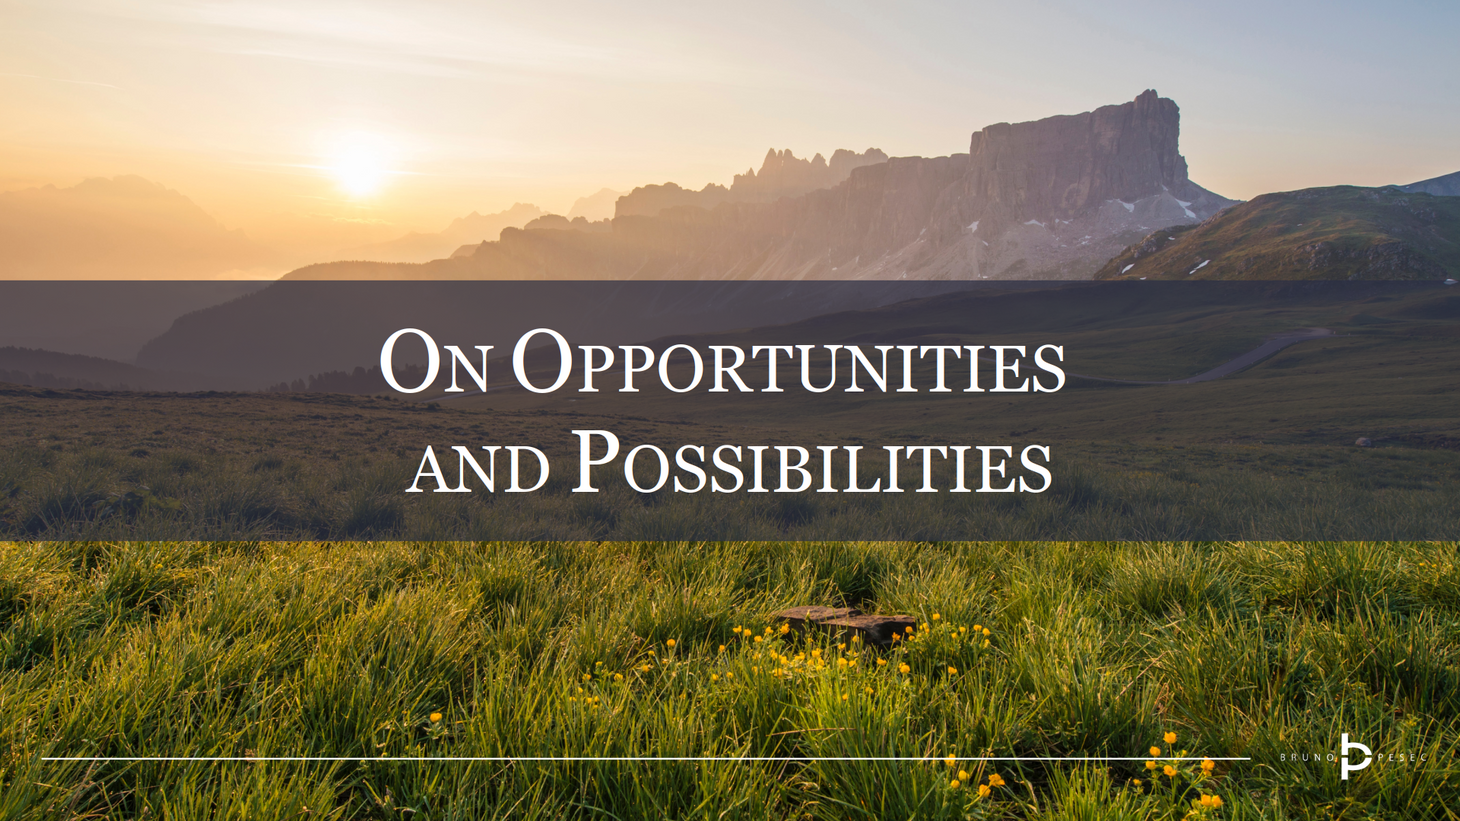 On opportunities and possibilities